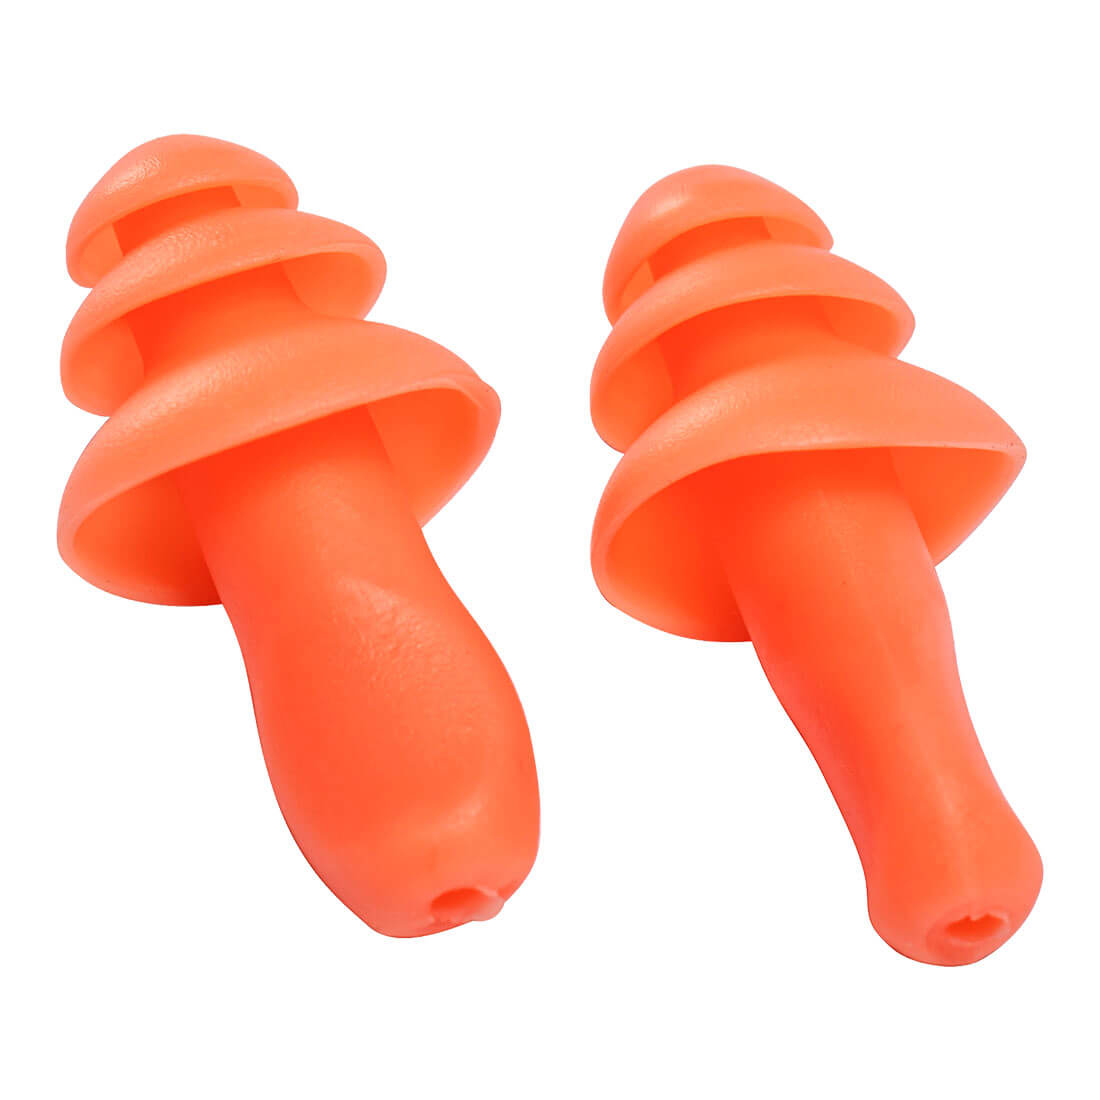 EP10 - Reusable TPR Ear Plugs (50 Pairs)